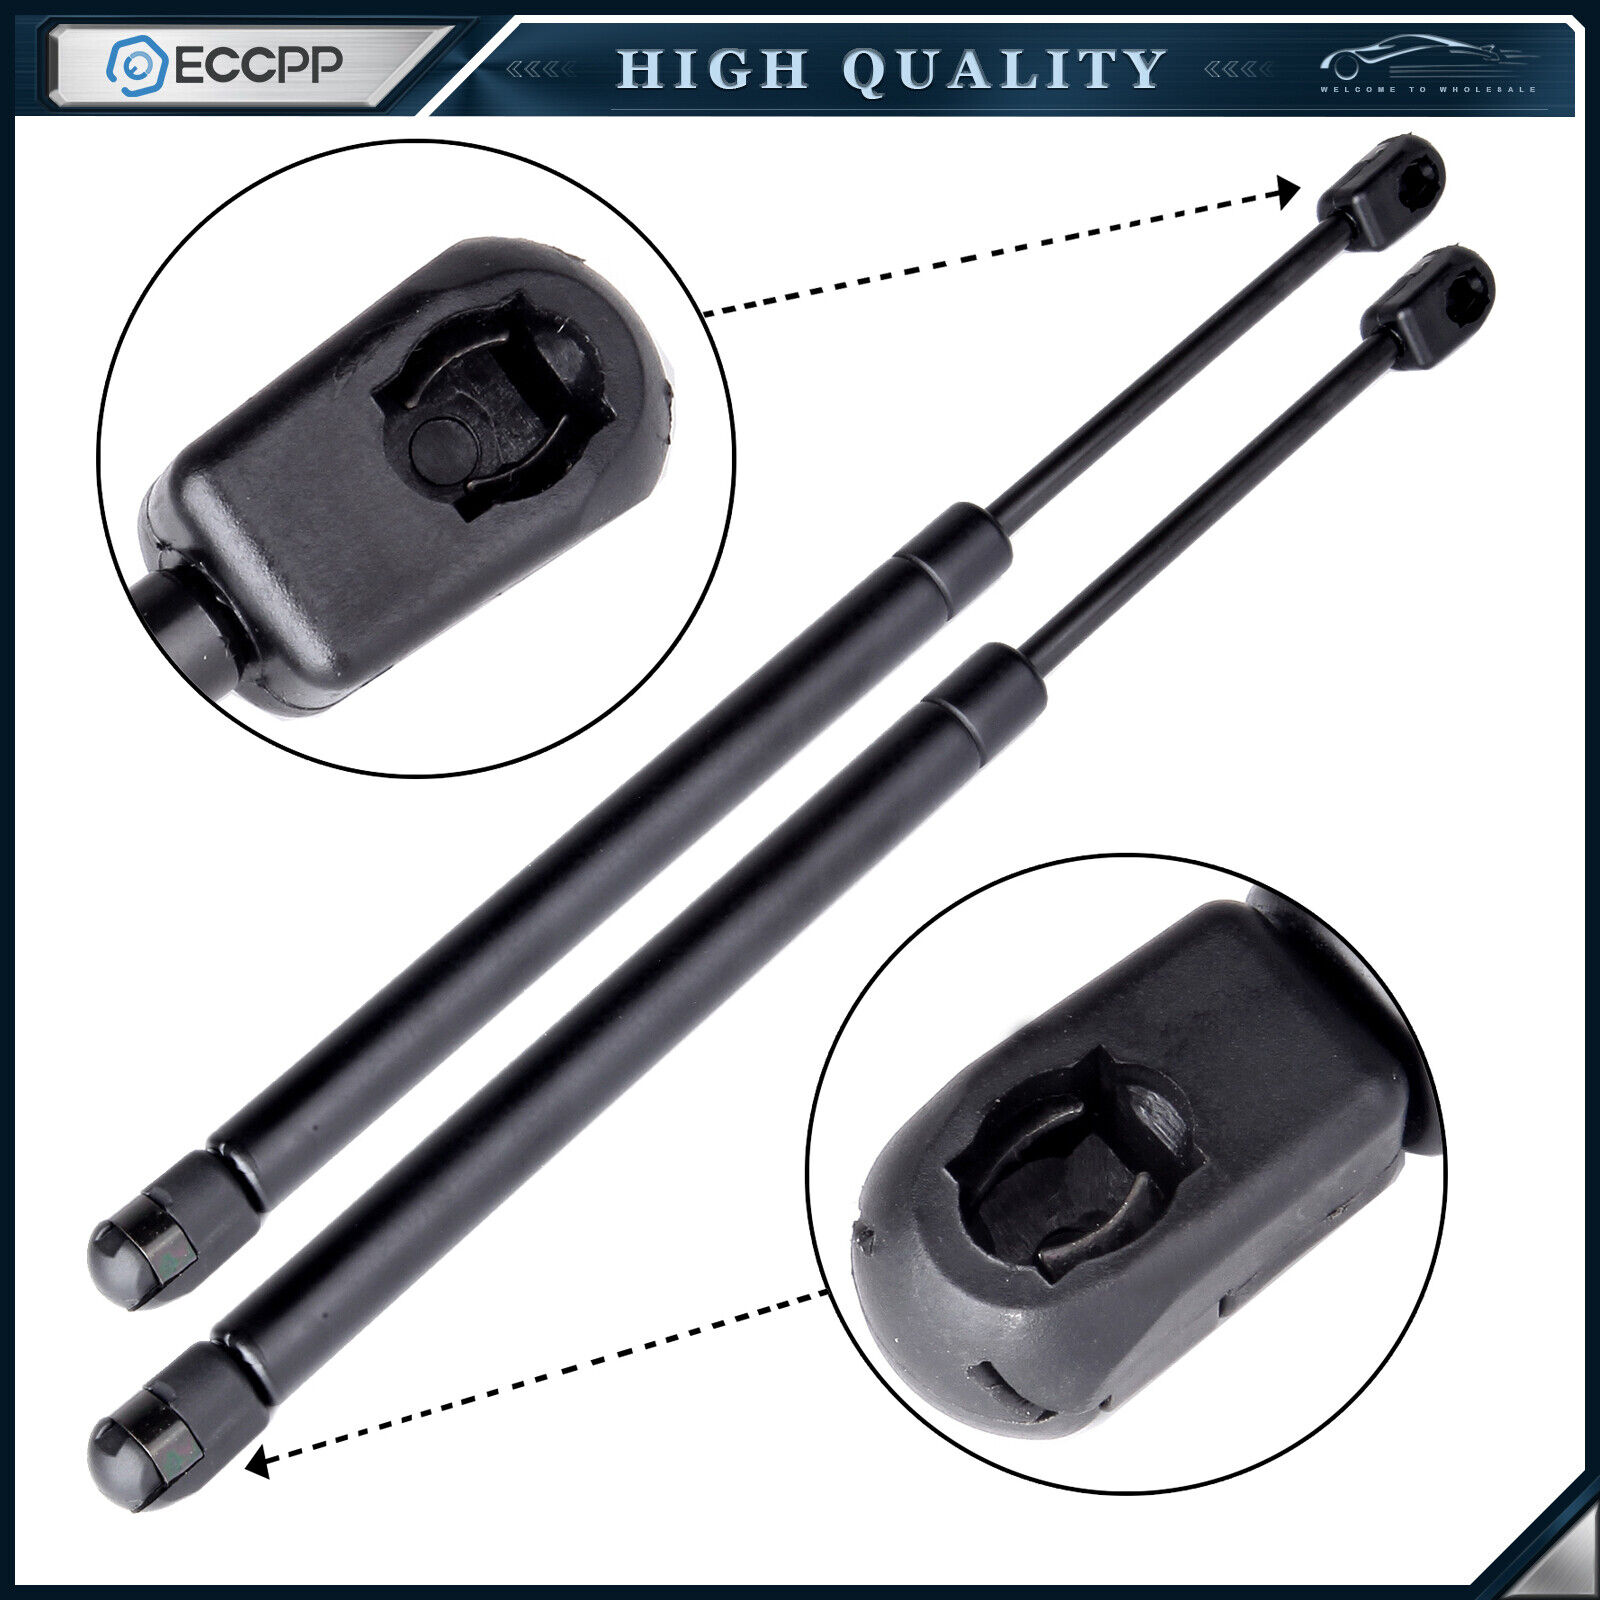 ECCPP 2 Pcs Hood Lift Supports Shocks Struts Springs For Acura TL 2006-2008 6351